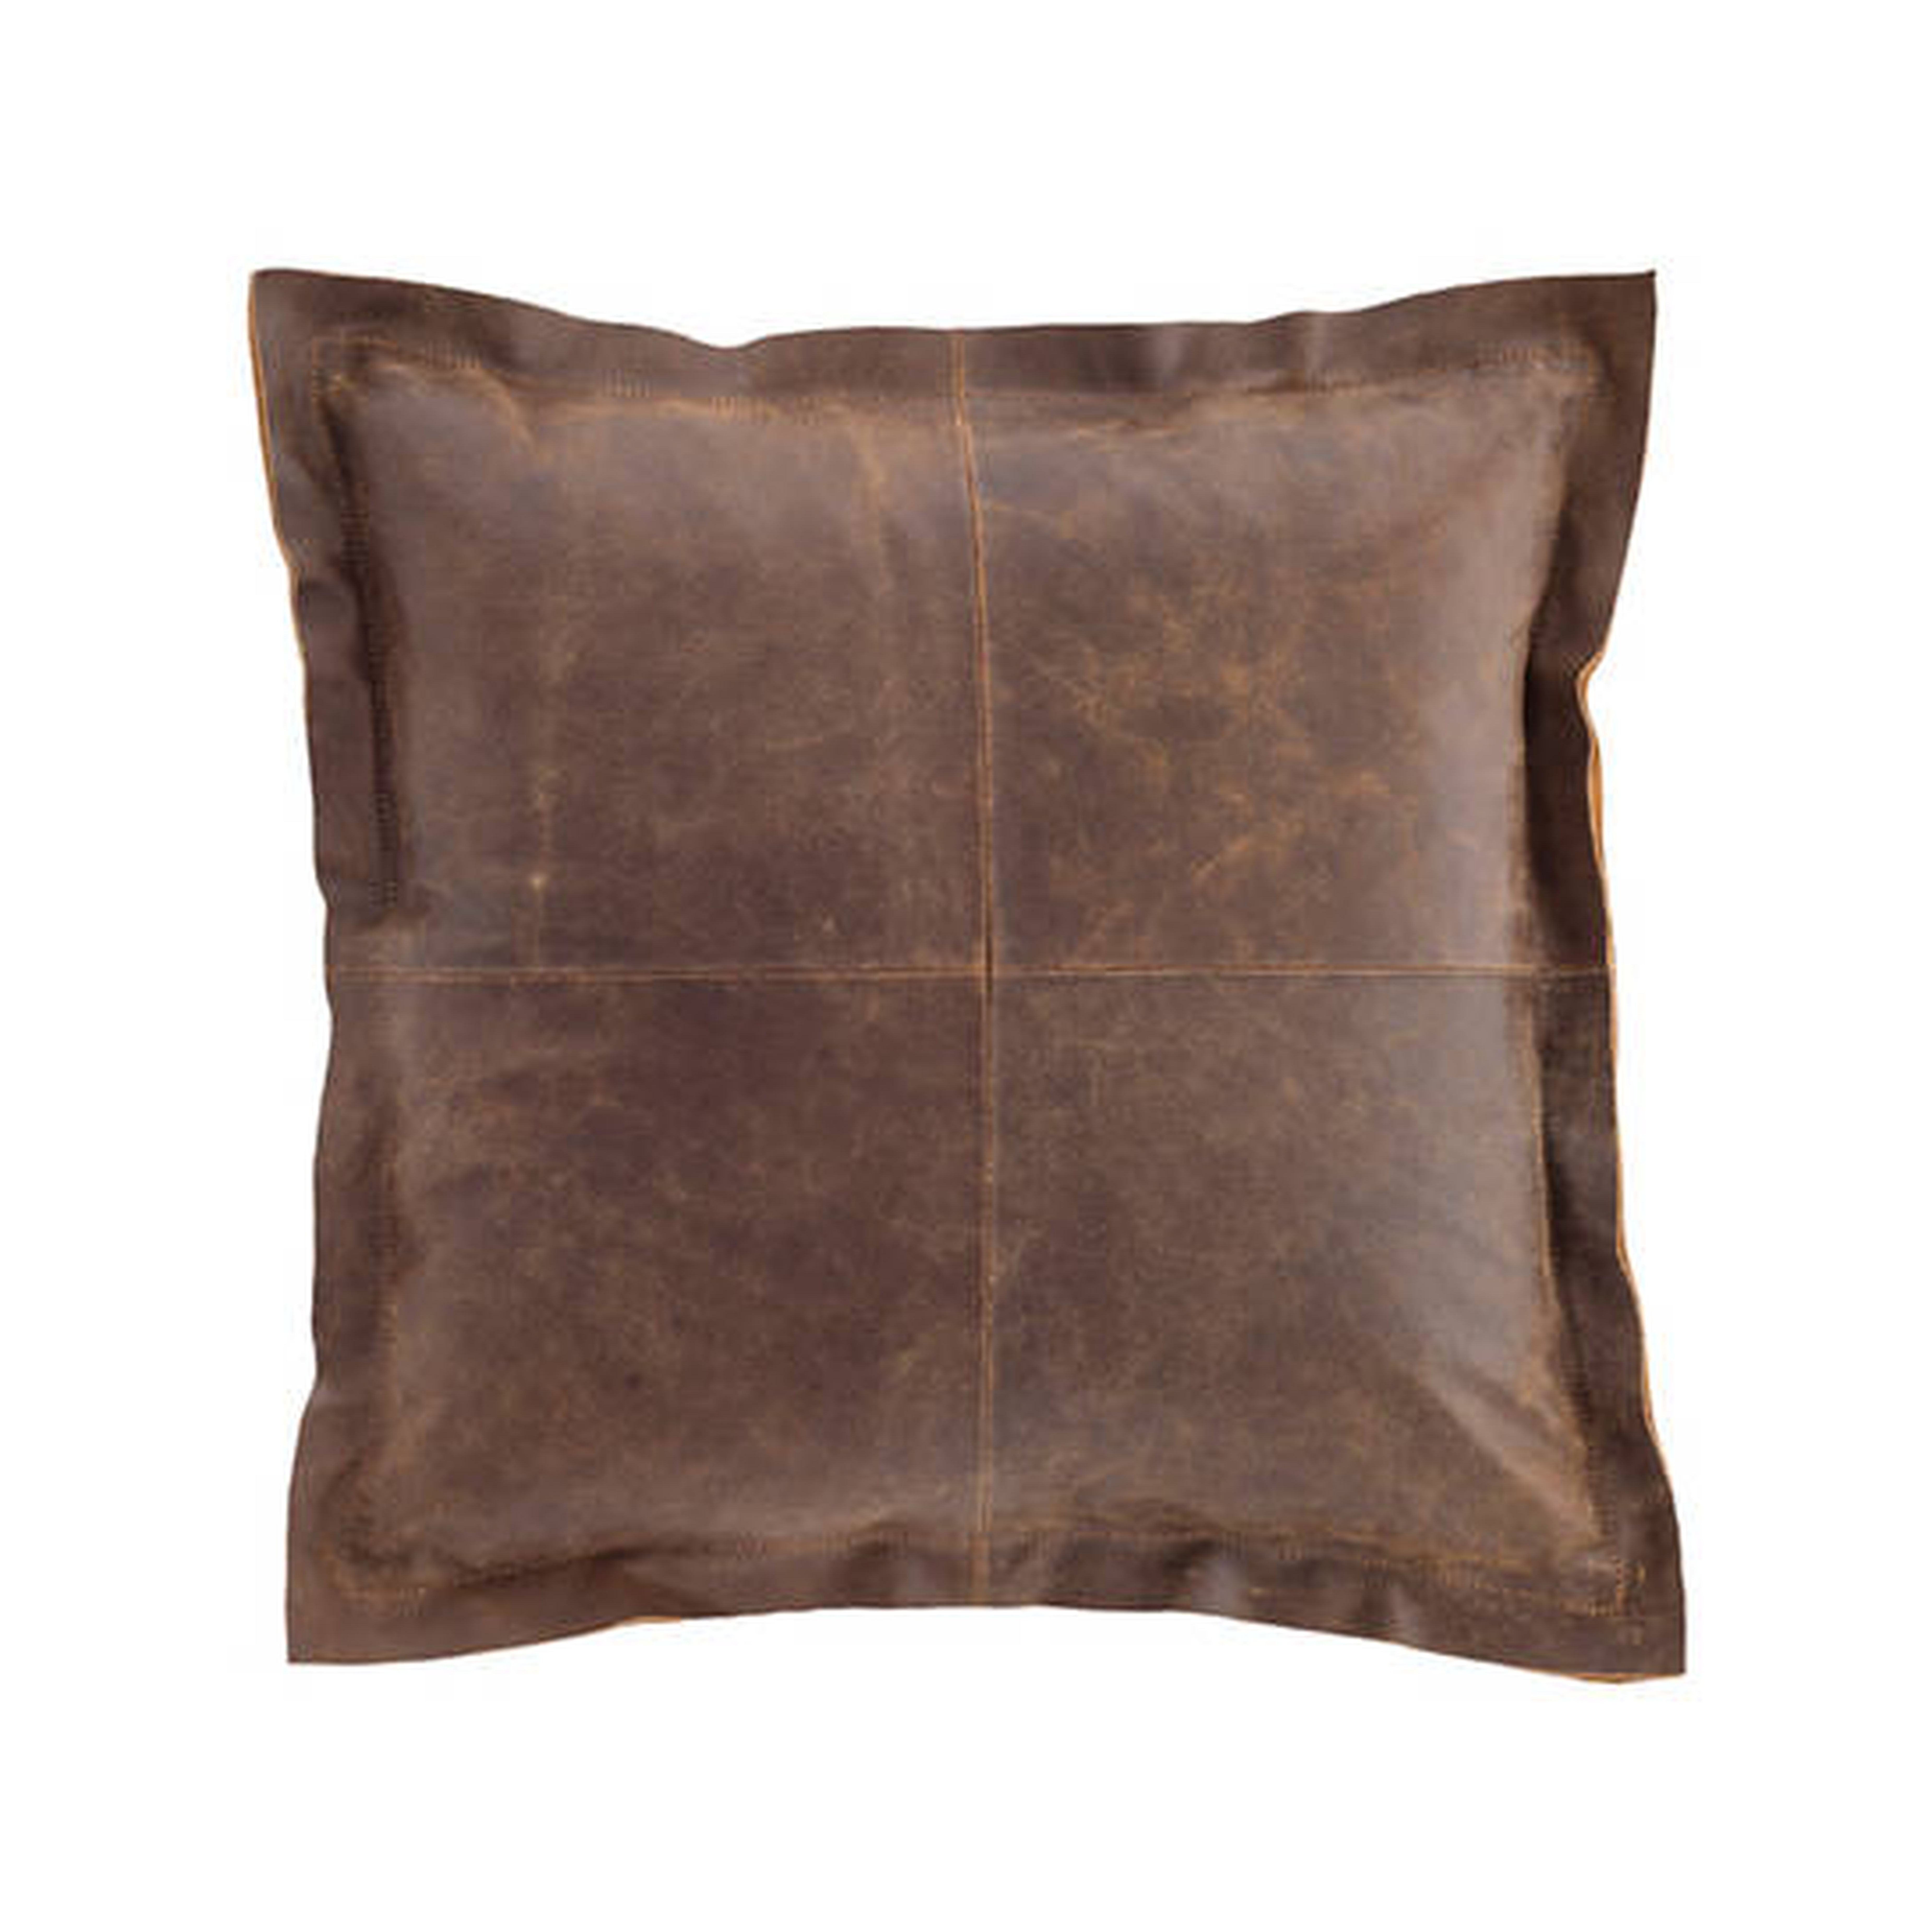 DISTRESSED LEATHER VINTAGE BROWN PILLOW - Dash and Albert